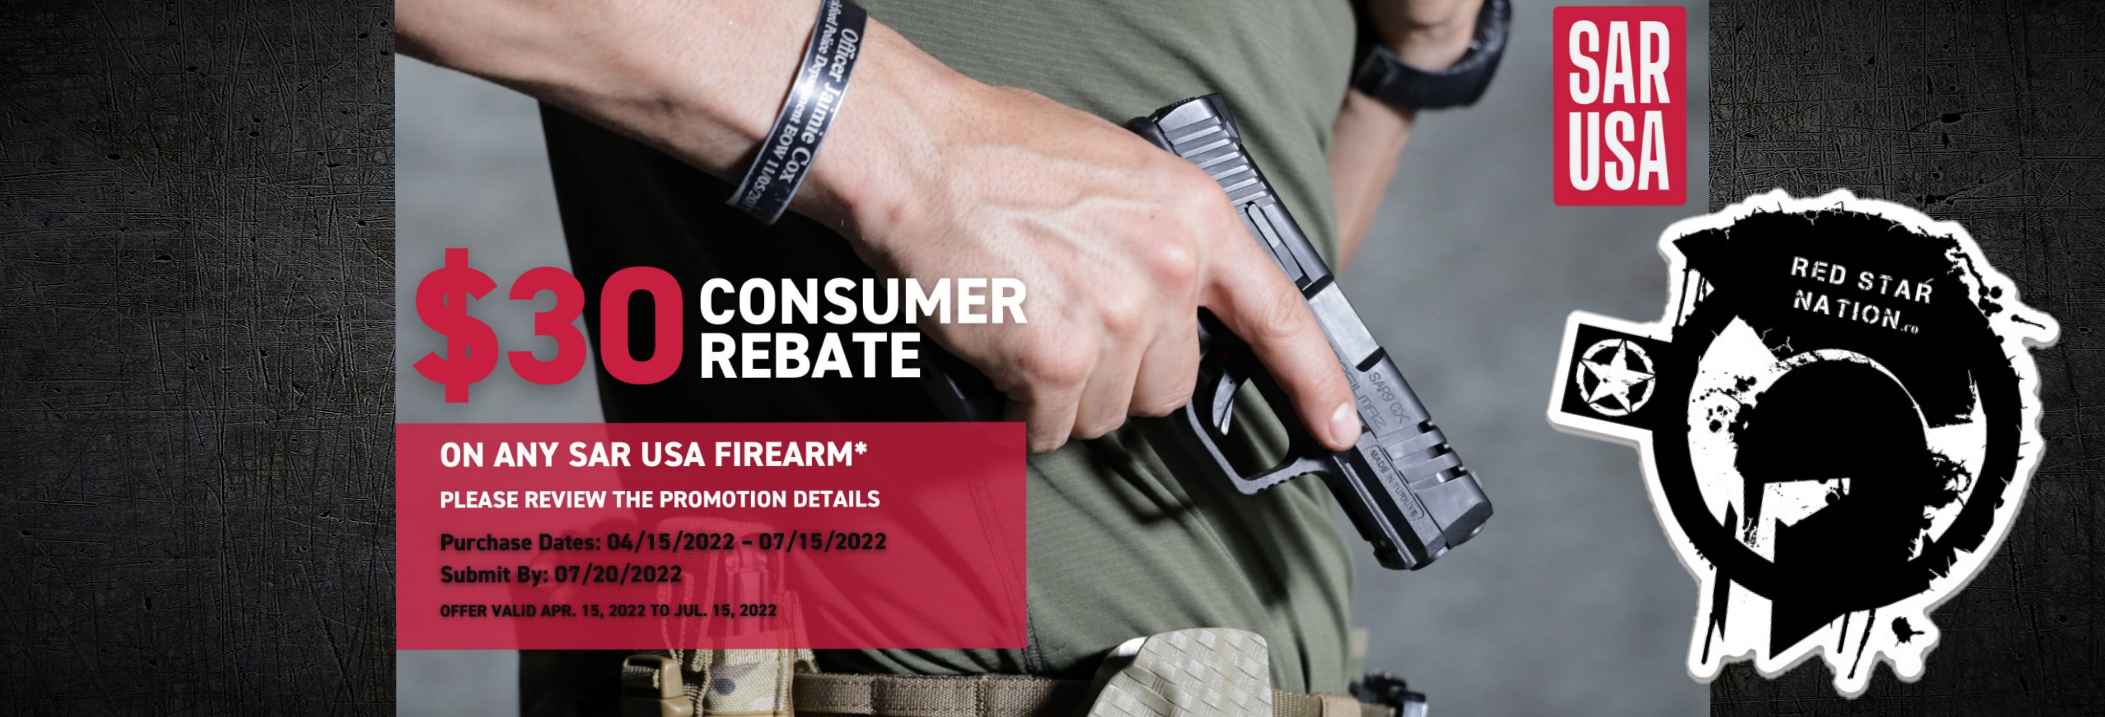 https://www.redstarnation.co/catalog/special-order-handguns/semi-automatic?brand_id=640%2C3000&page=1